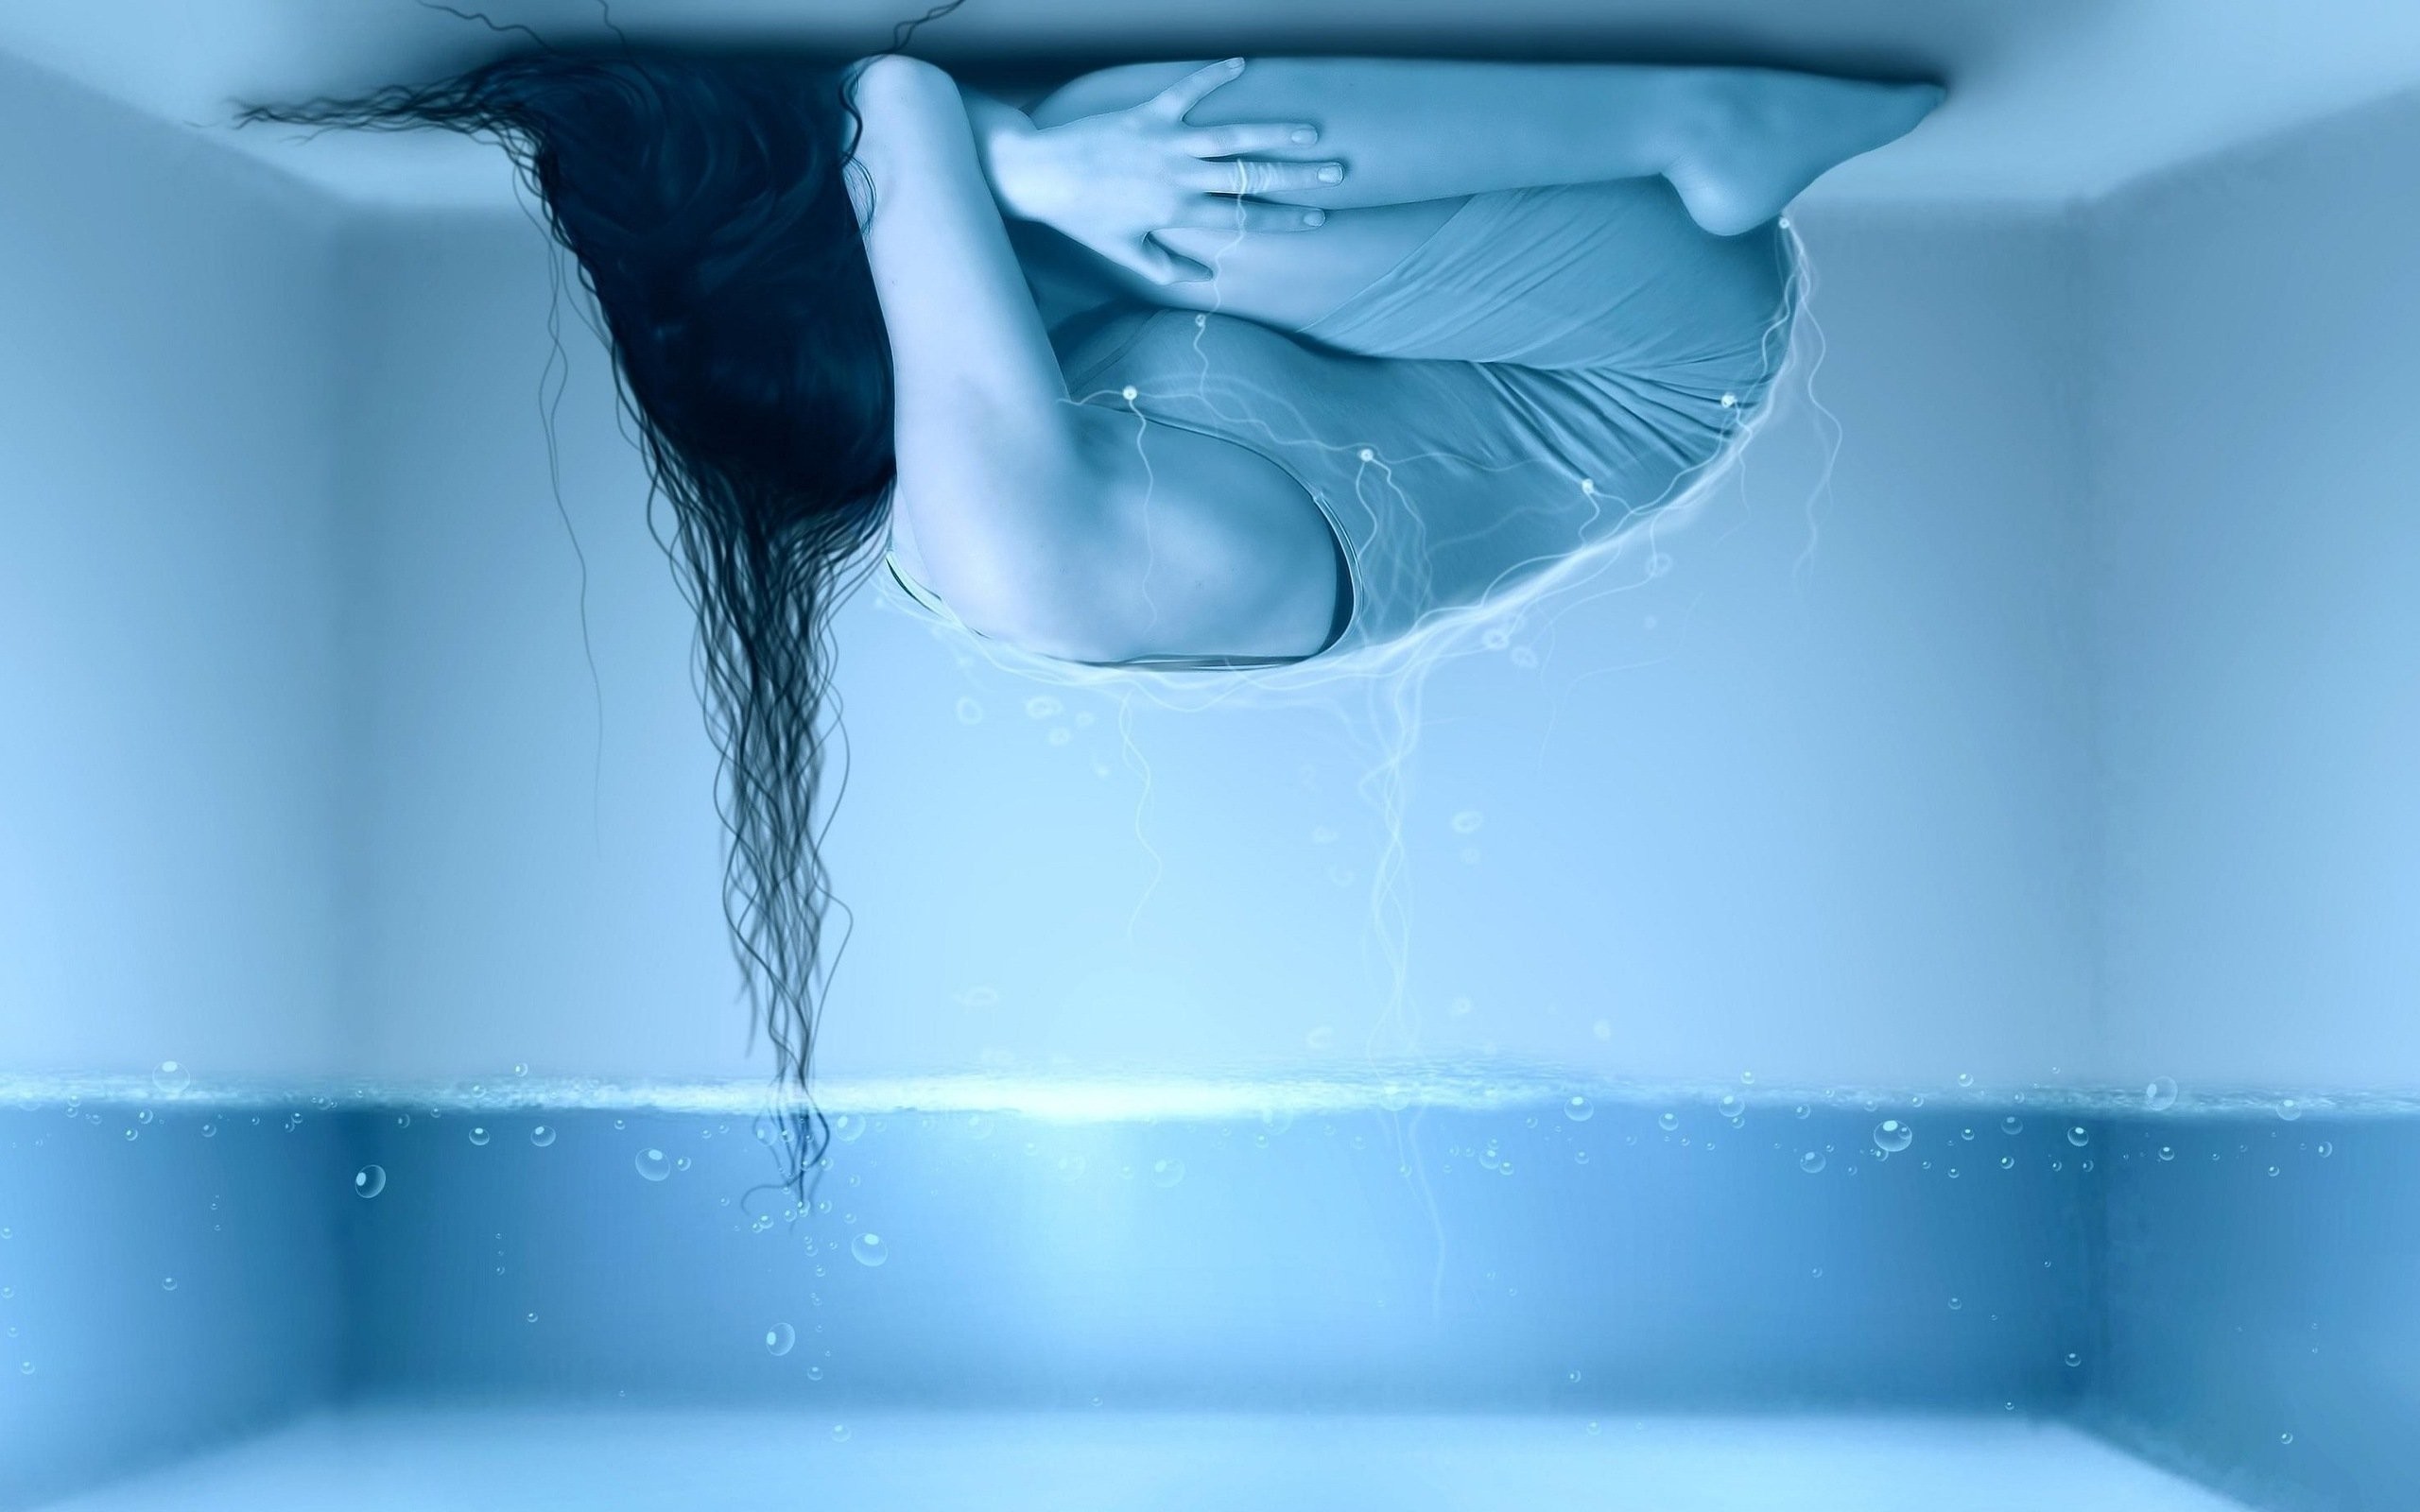 2560x1600 UPSIDE DOWN - girl curled ceiling bubbling water cube wallpaper |   | 480688 | WallpaperUP